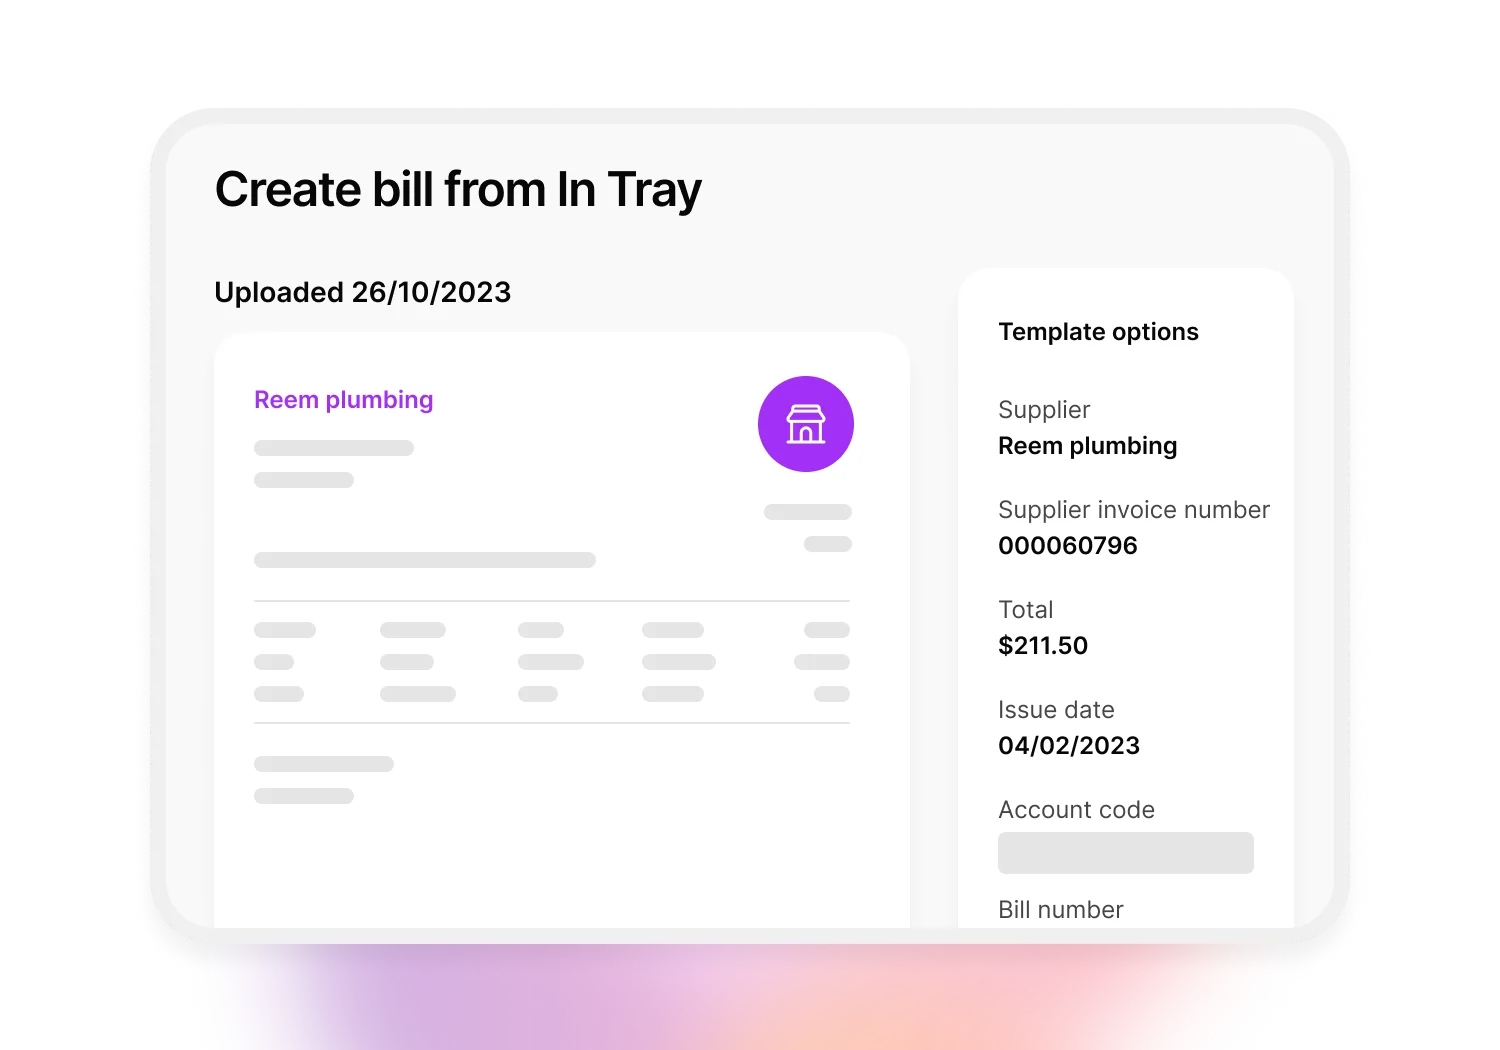 Create a bill from the In Tray. Easily see the supplier, invoice details, and issue date.